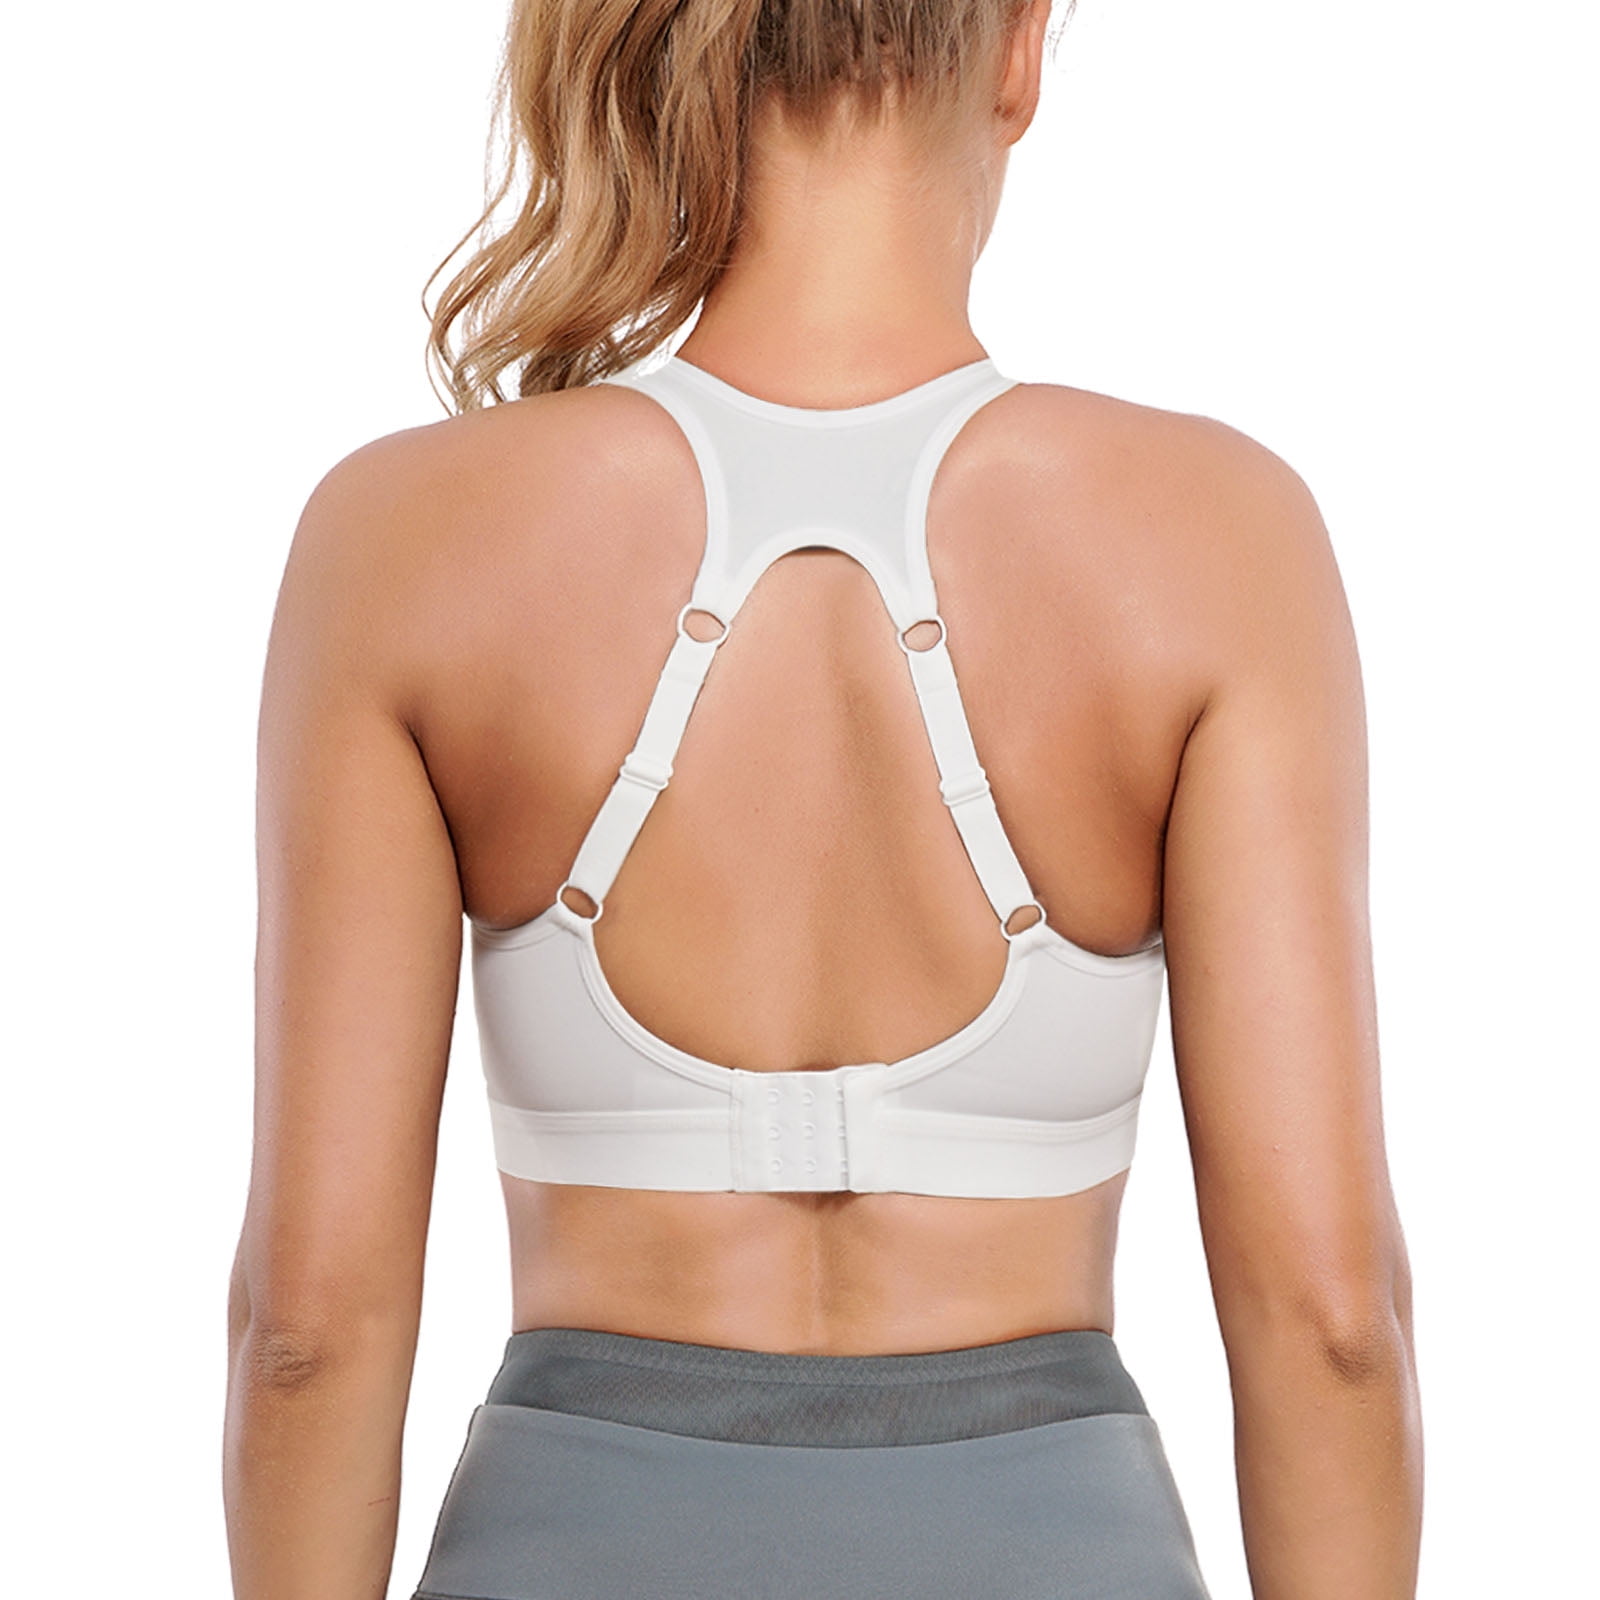 Gotoly Sports Bra For Women High Impact Full Support Adjustable